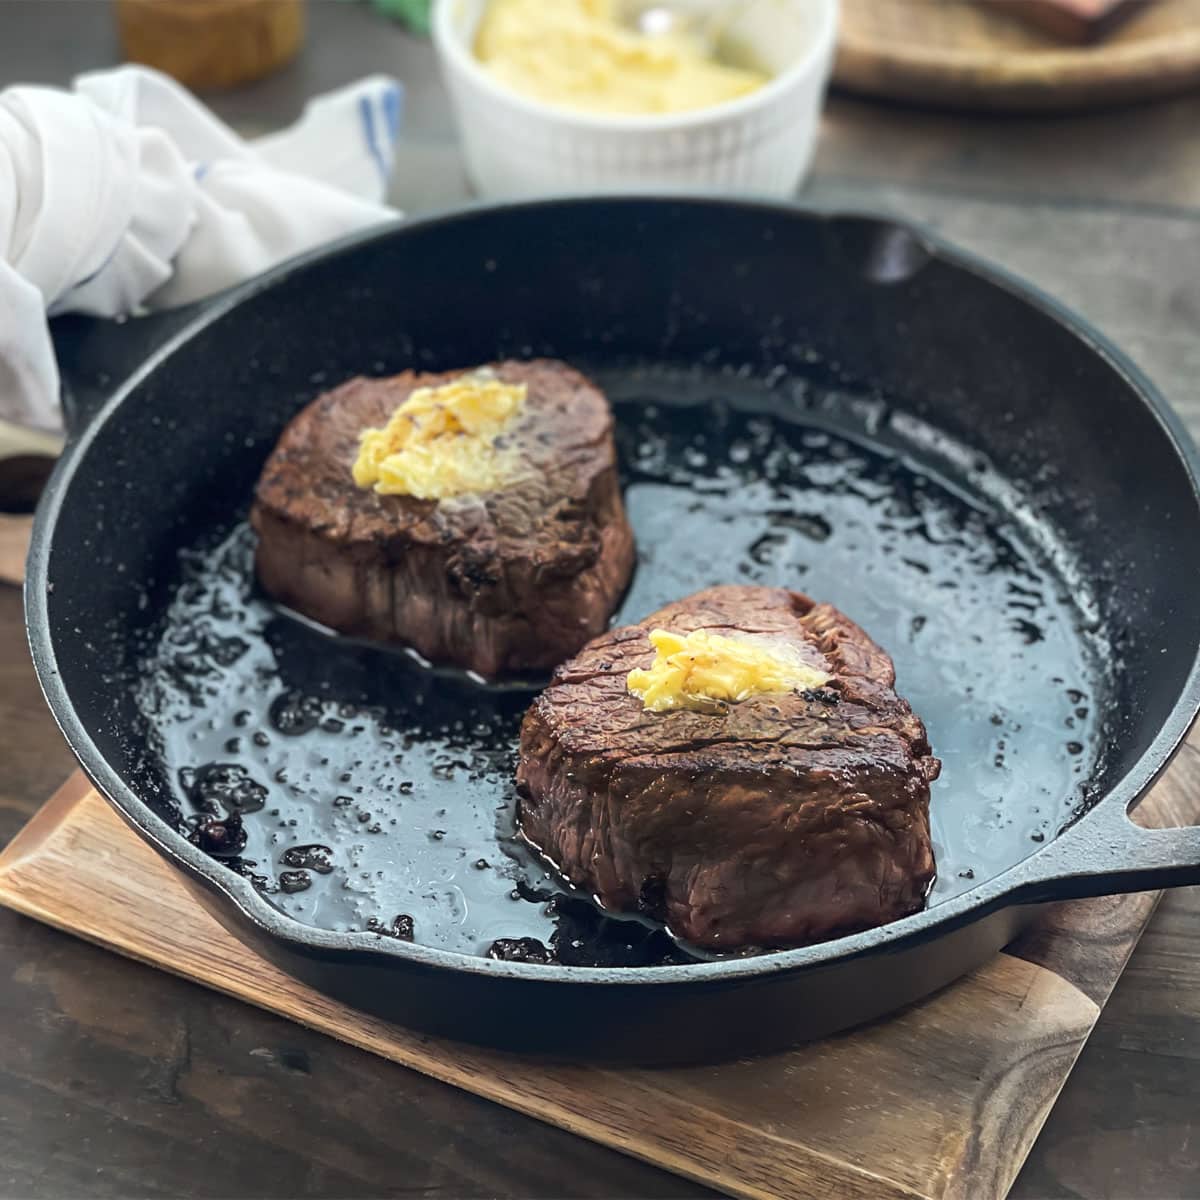 Two cooked filet mignon steaks in a cast iron skillet, topped with butter.